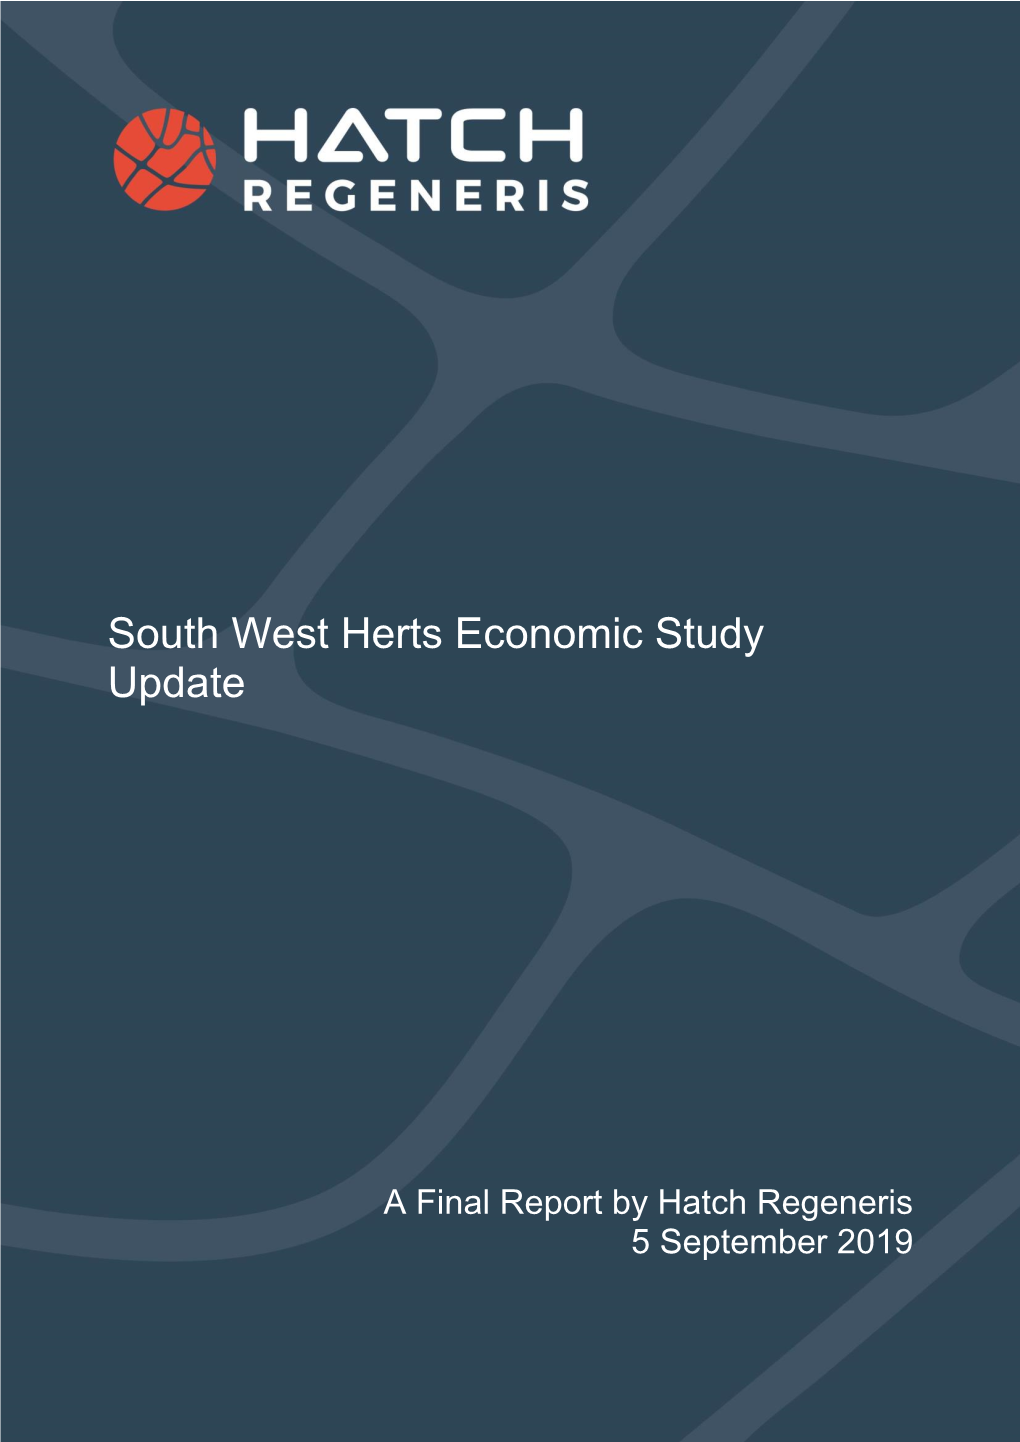 South West Herts Economic Study Update